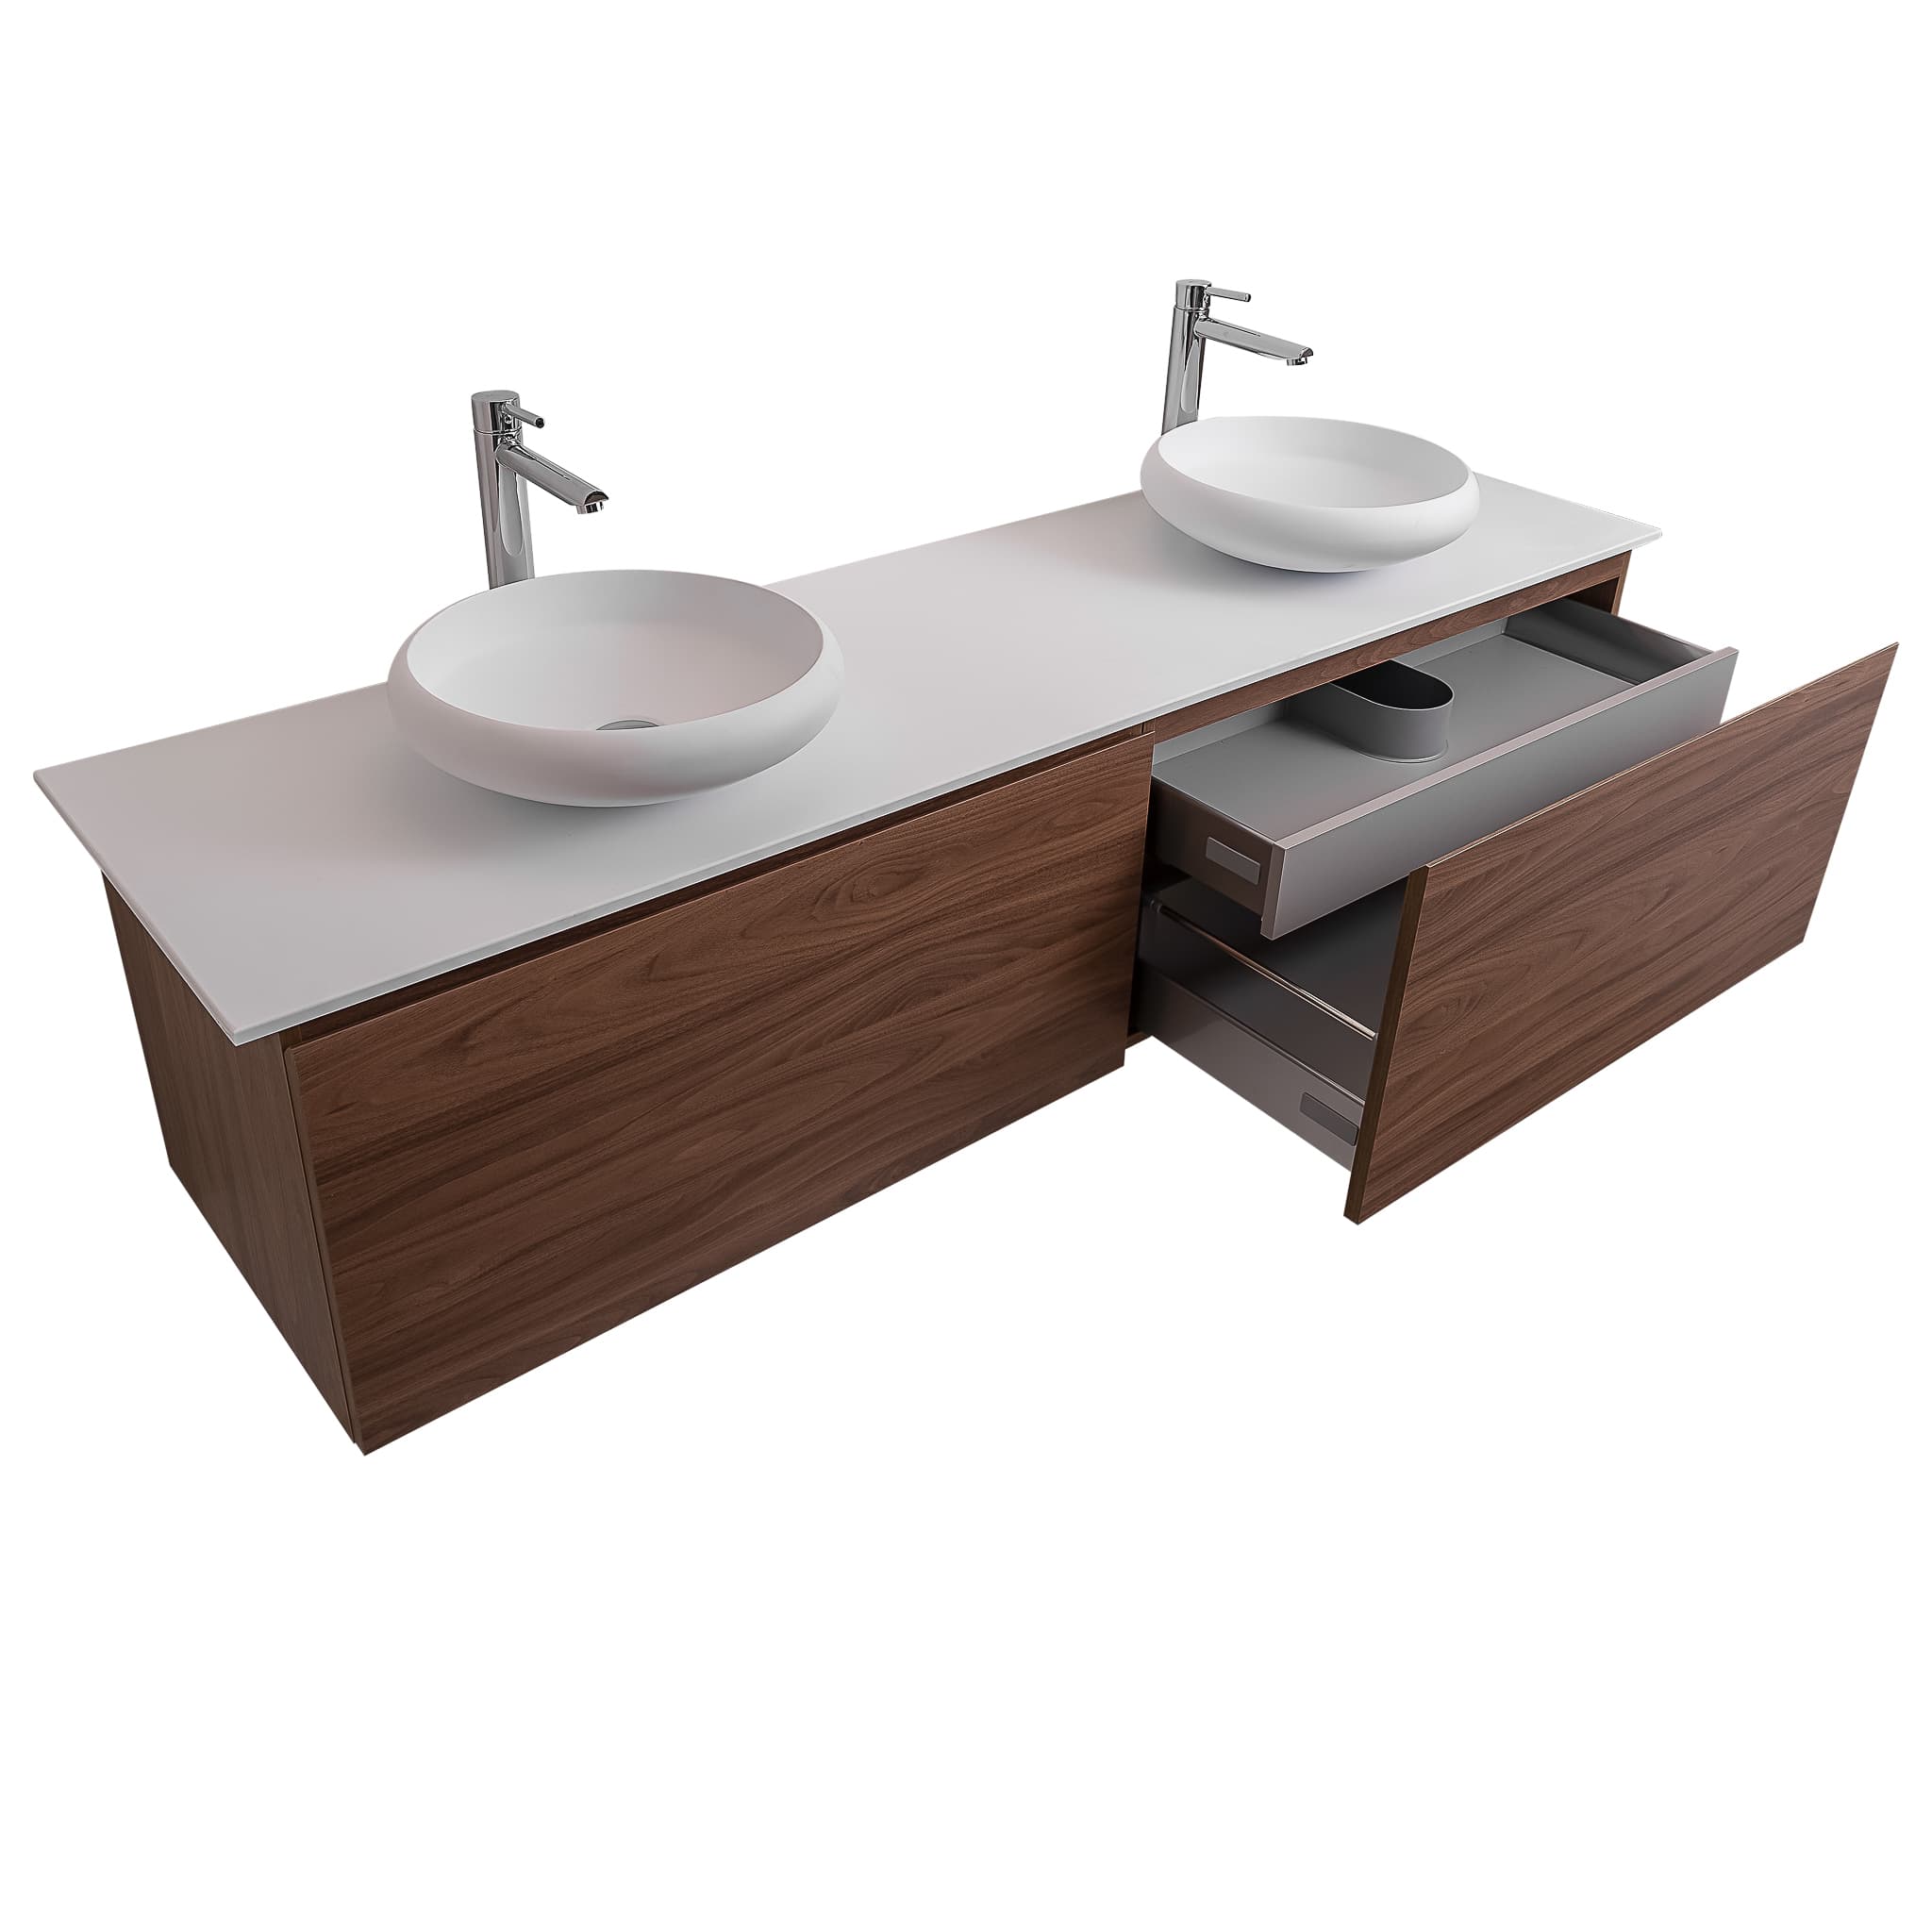 Venice 72 Walnut Wood Texture Cabinet, Solid Surface Flat White Counter And Two Round Solid Surface White Basin 1153, Wall Mounted Modern Vanity Set